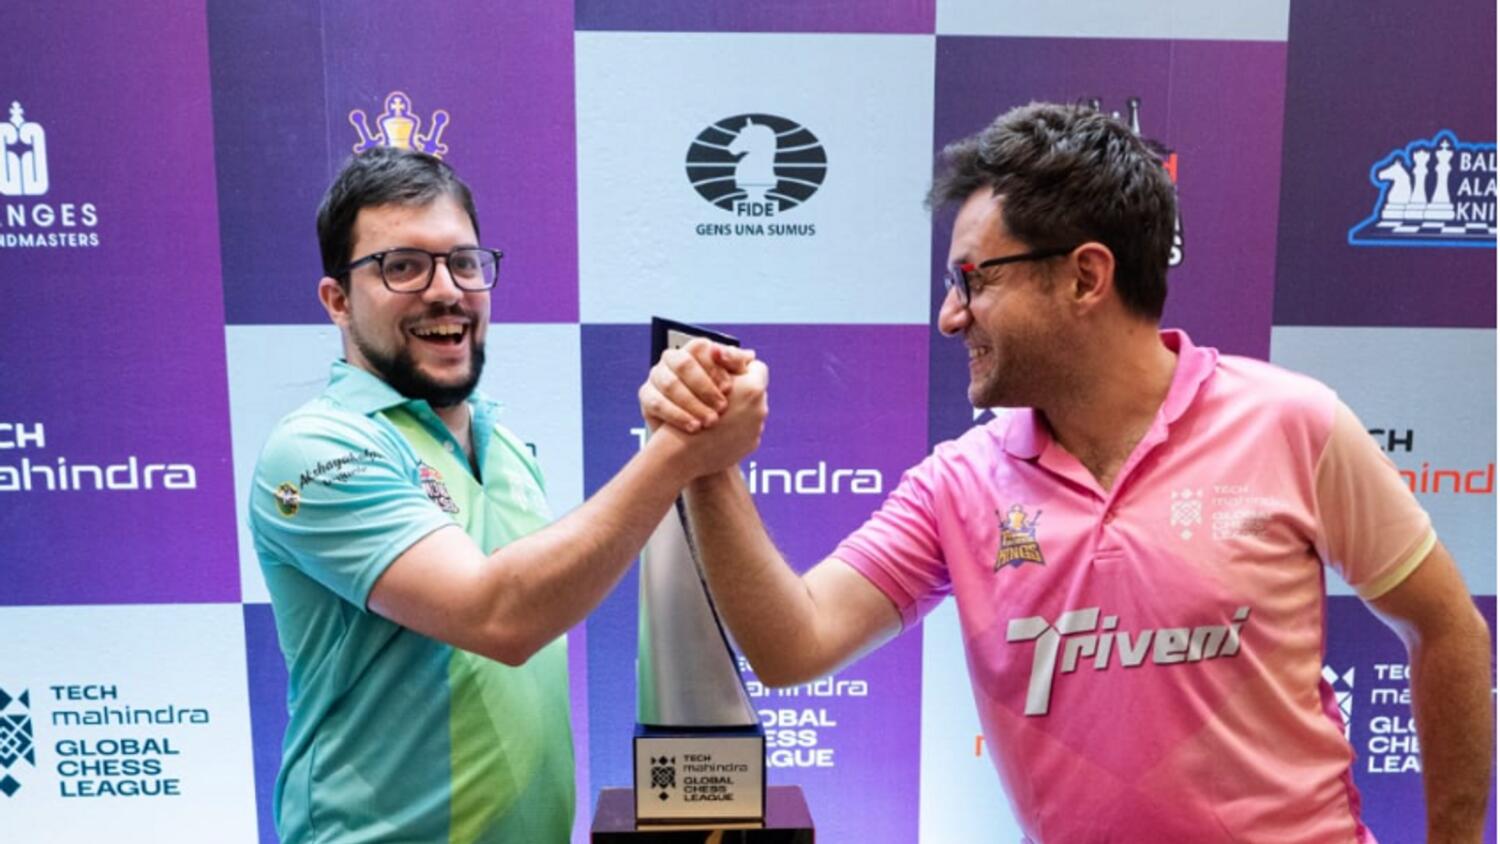 Maxime Vachier-Lagrave (left) and Levon Aronian will represent upGrad Mumba Masters and Triveni Continental Kings in the final. — Supplied photo